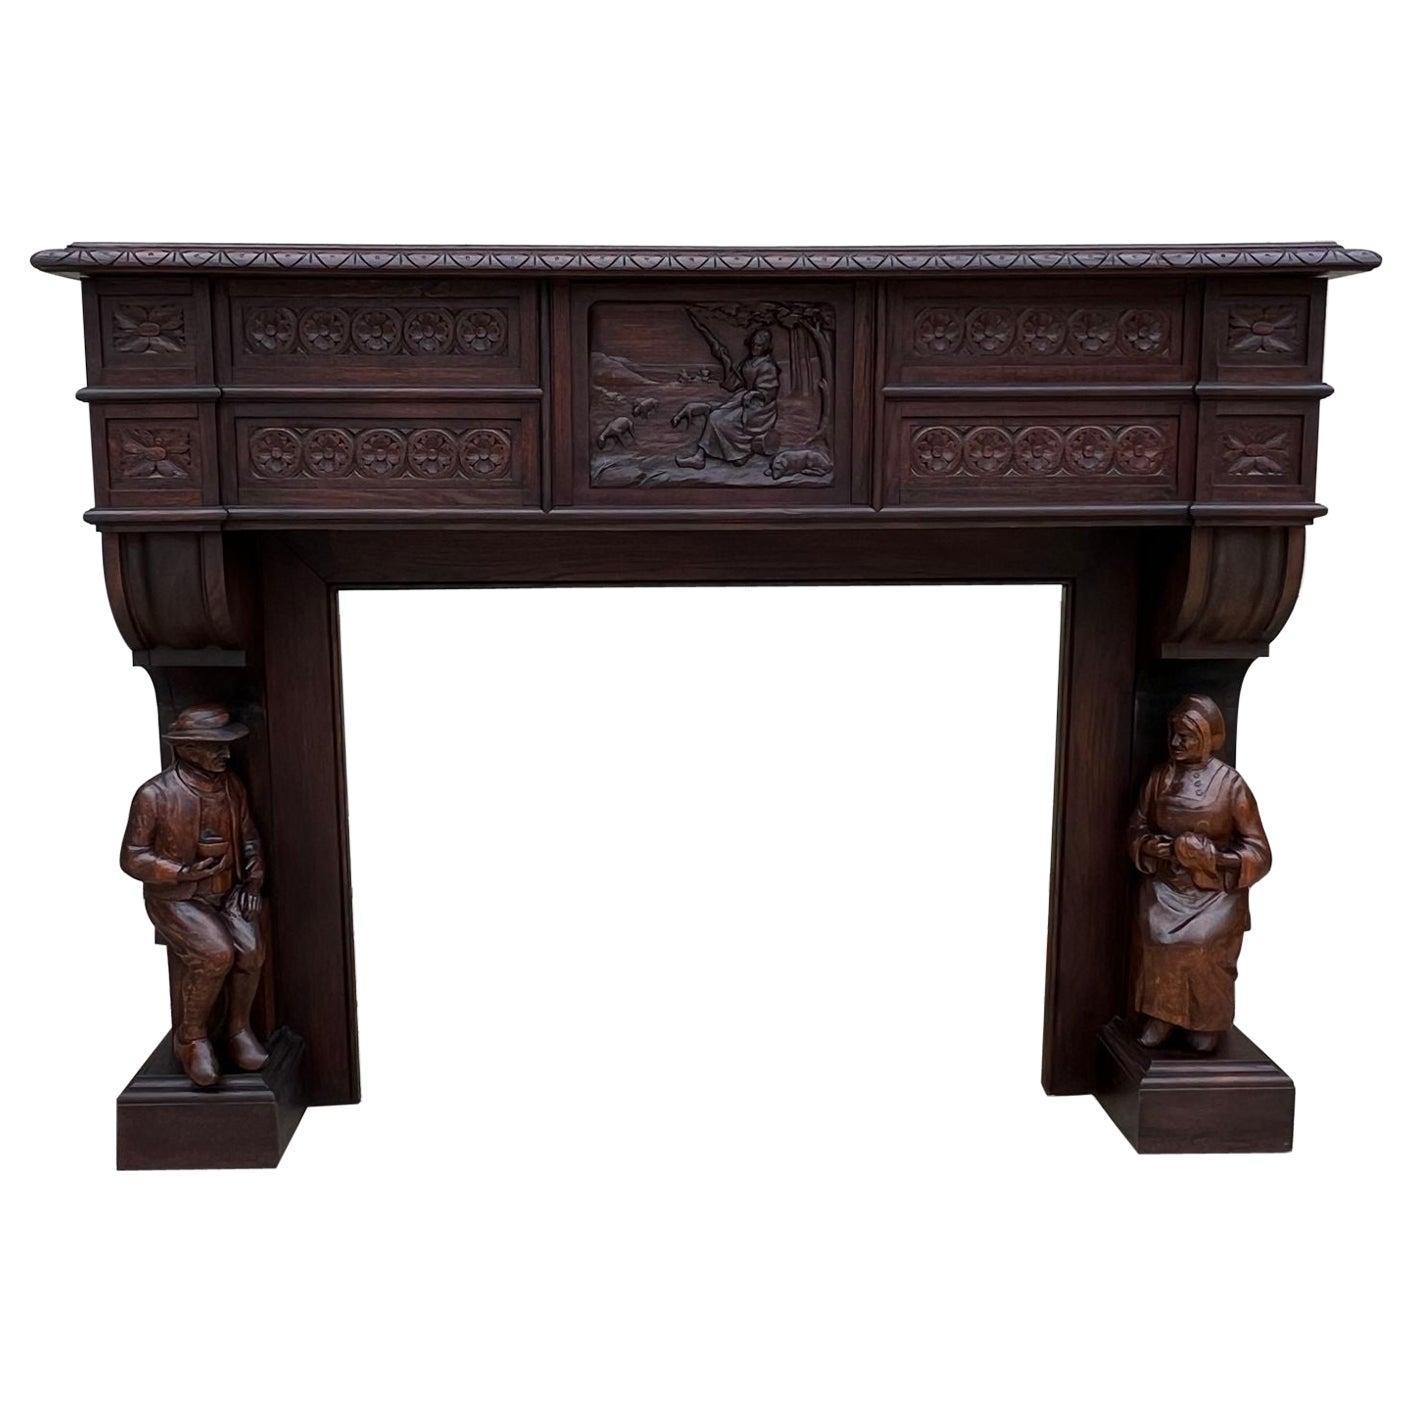 Antique French Mantel Fireplace Surround Breton Brittany Carved Dark Oak For Sale